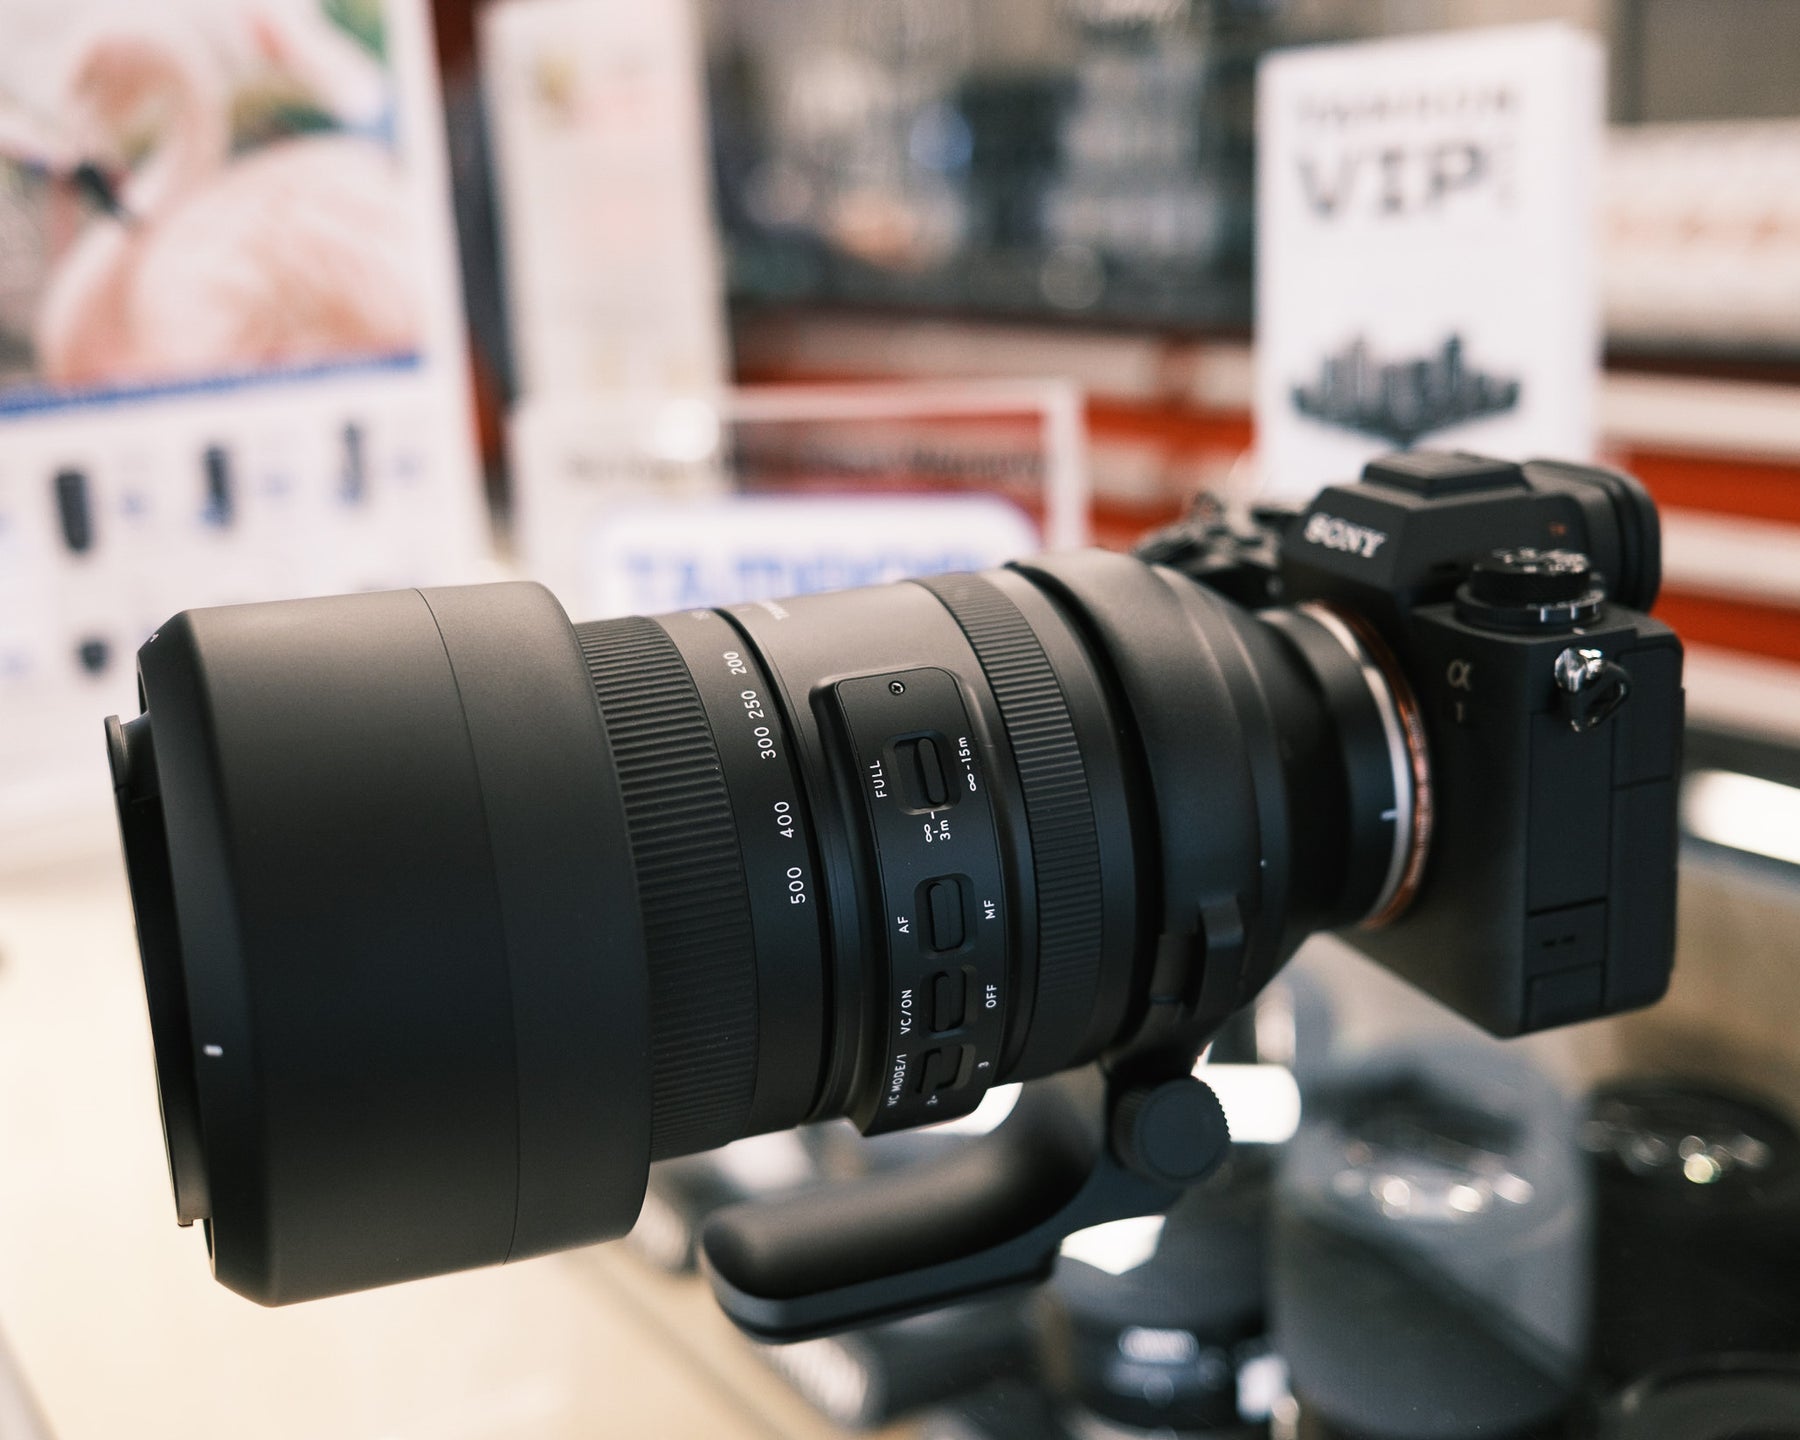 Hands on with the Tamron 150-500mm f/5-6.7 Di III VC VXD Lens for Sony E-Mount